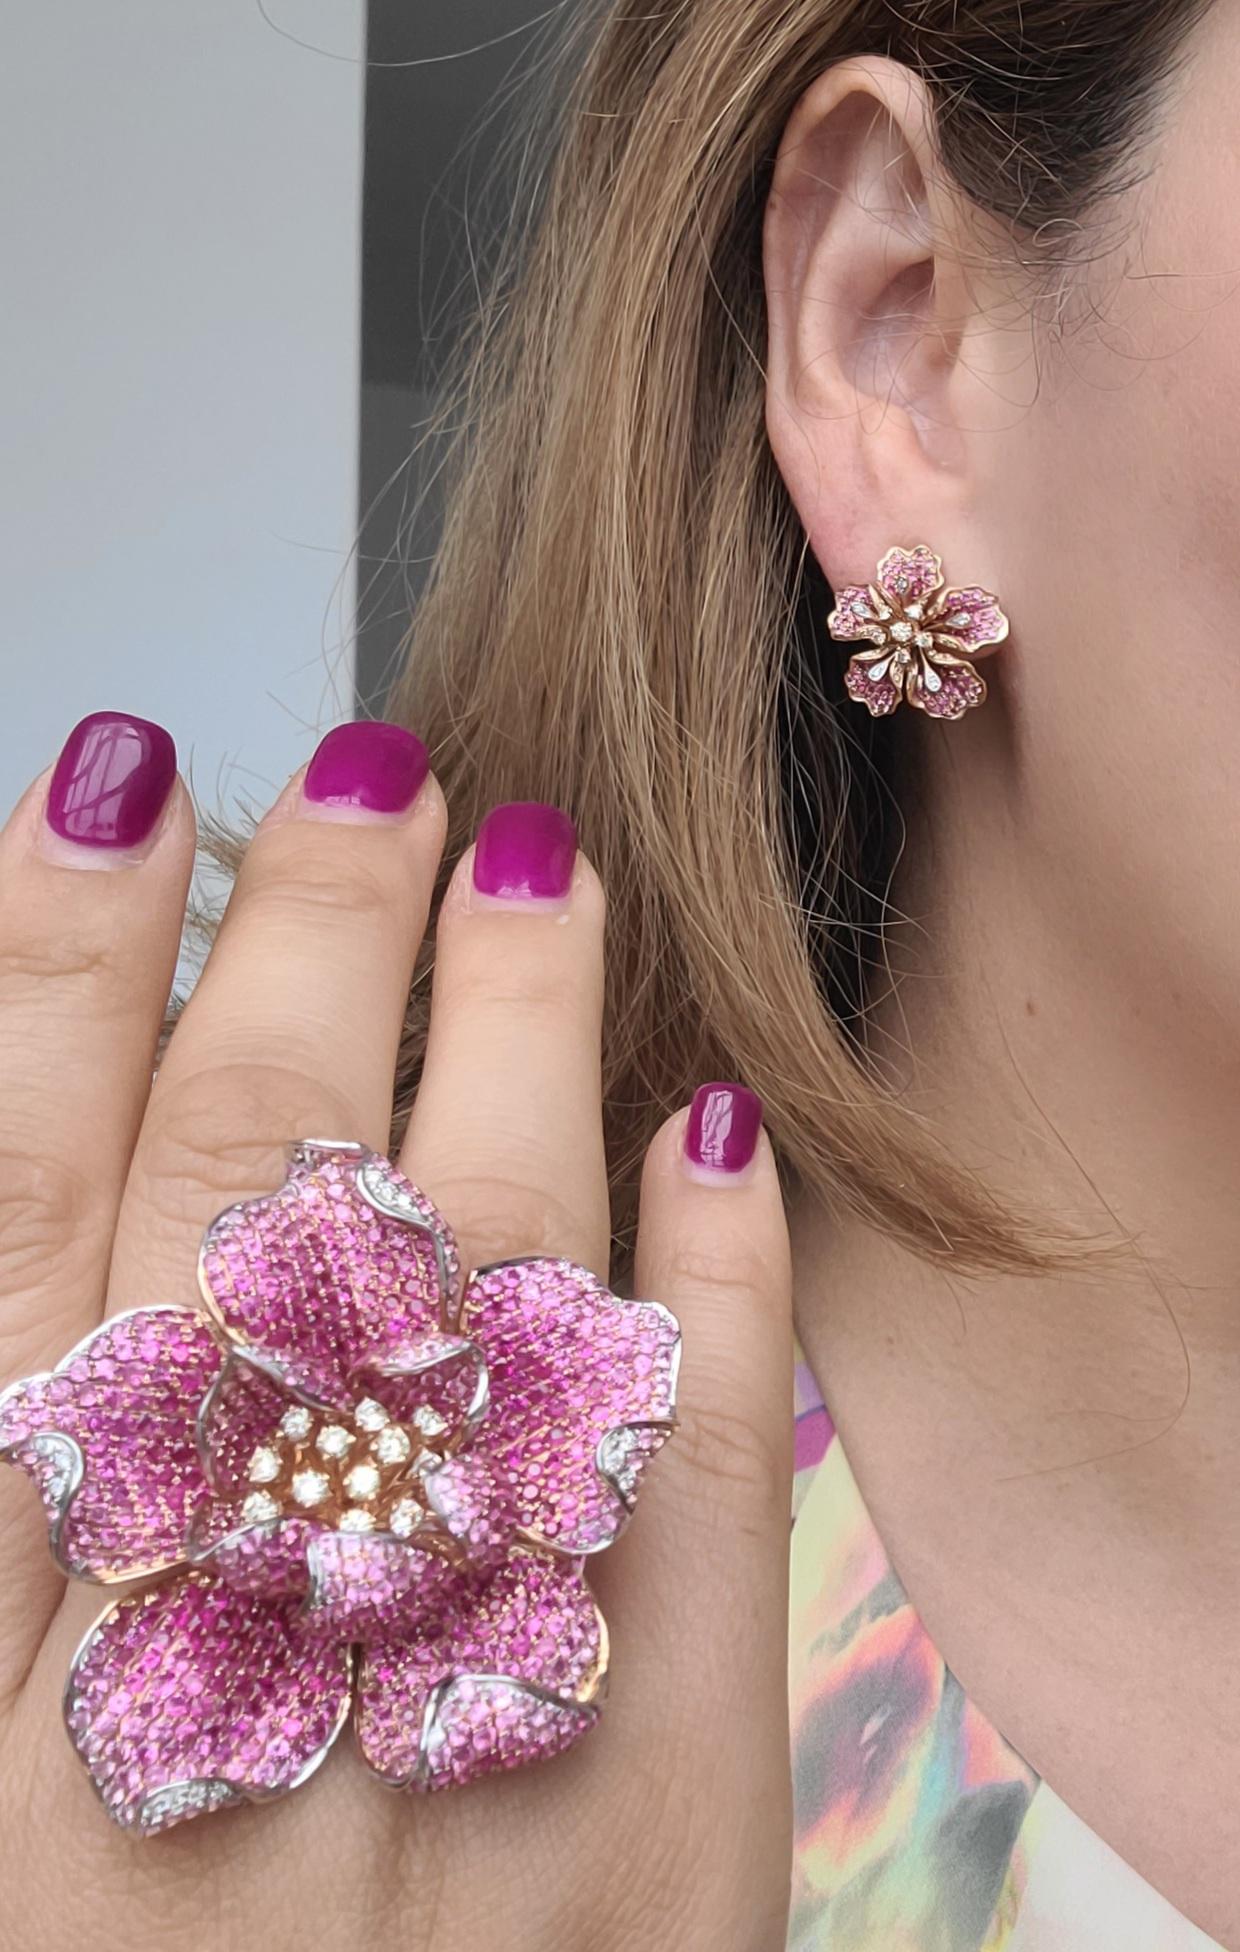 FLOWER GARDEN COLLECTION, Earring with Rubies & Pink Sapphires

Amazing work with small details on pedals 
10 Round Diamonds - 0.03 CT
58 Round Fancy Diamonds -  0.46 CT
154 Round Pink Sapphire -  1.57 CT
40 Round Rubies -  0.73 CT
18K Rose Gold -